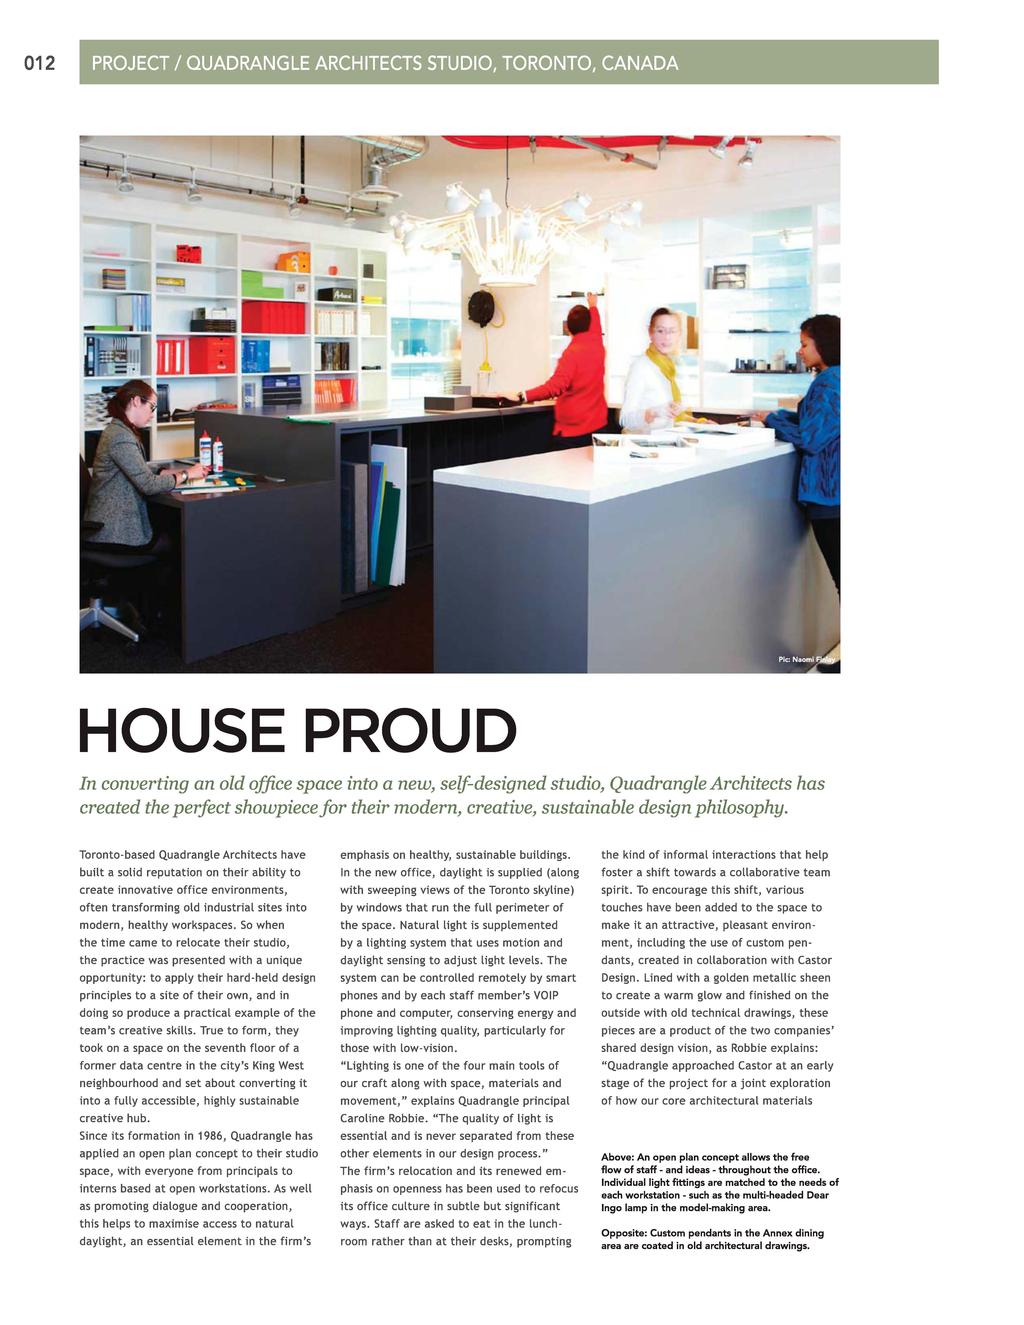 012 HOUSE PROUD In converting an old office space into a new, self-designed studio, Quadrangle Architects has created the perfect showpiece for their modern, creative, sustainable design philosophy.